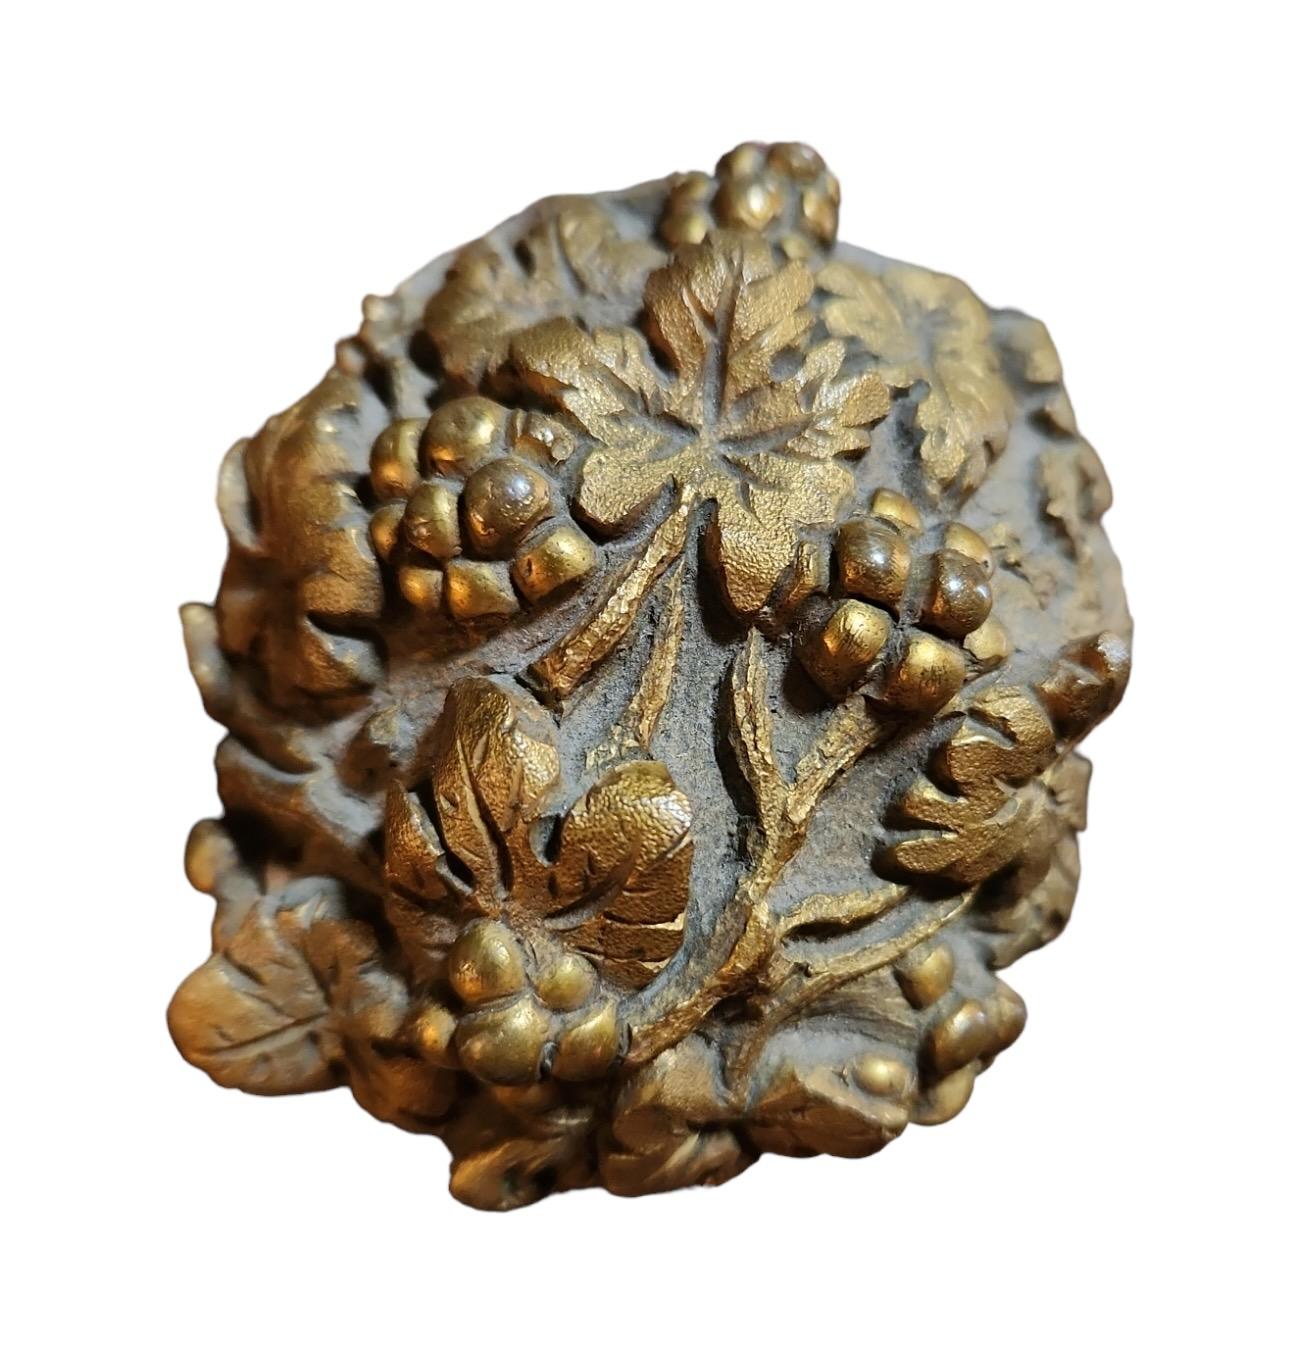 Beautiful marble color with the finest dore bronze casting. Bacchus head motif. Lids are attached.